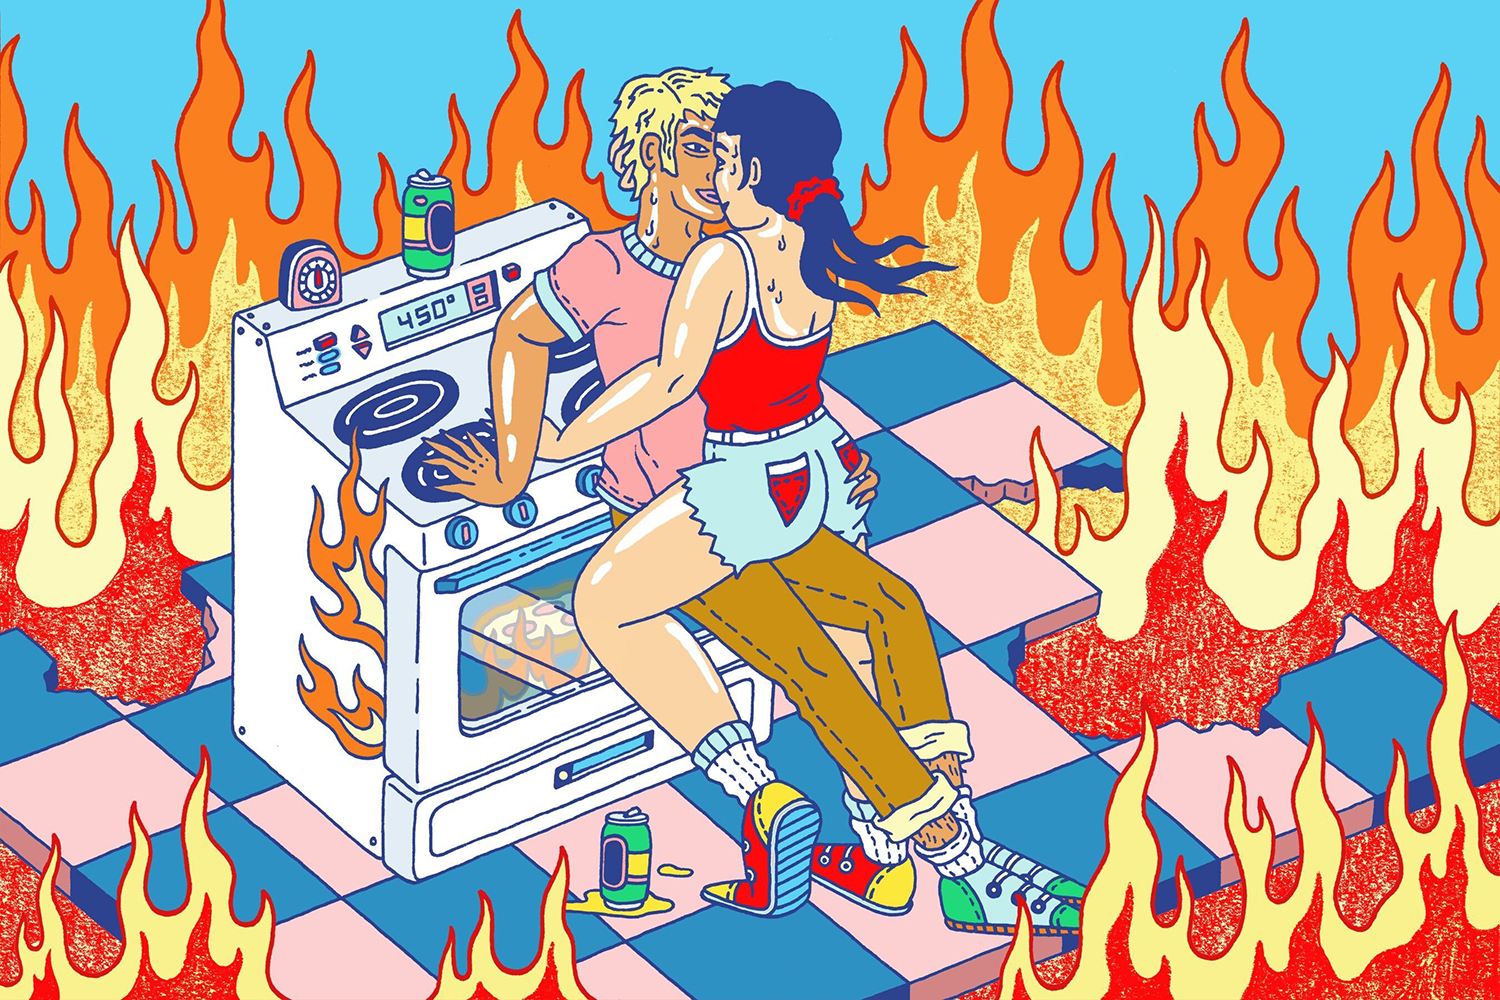 couple making out in a burning kitchen